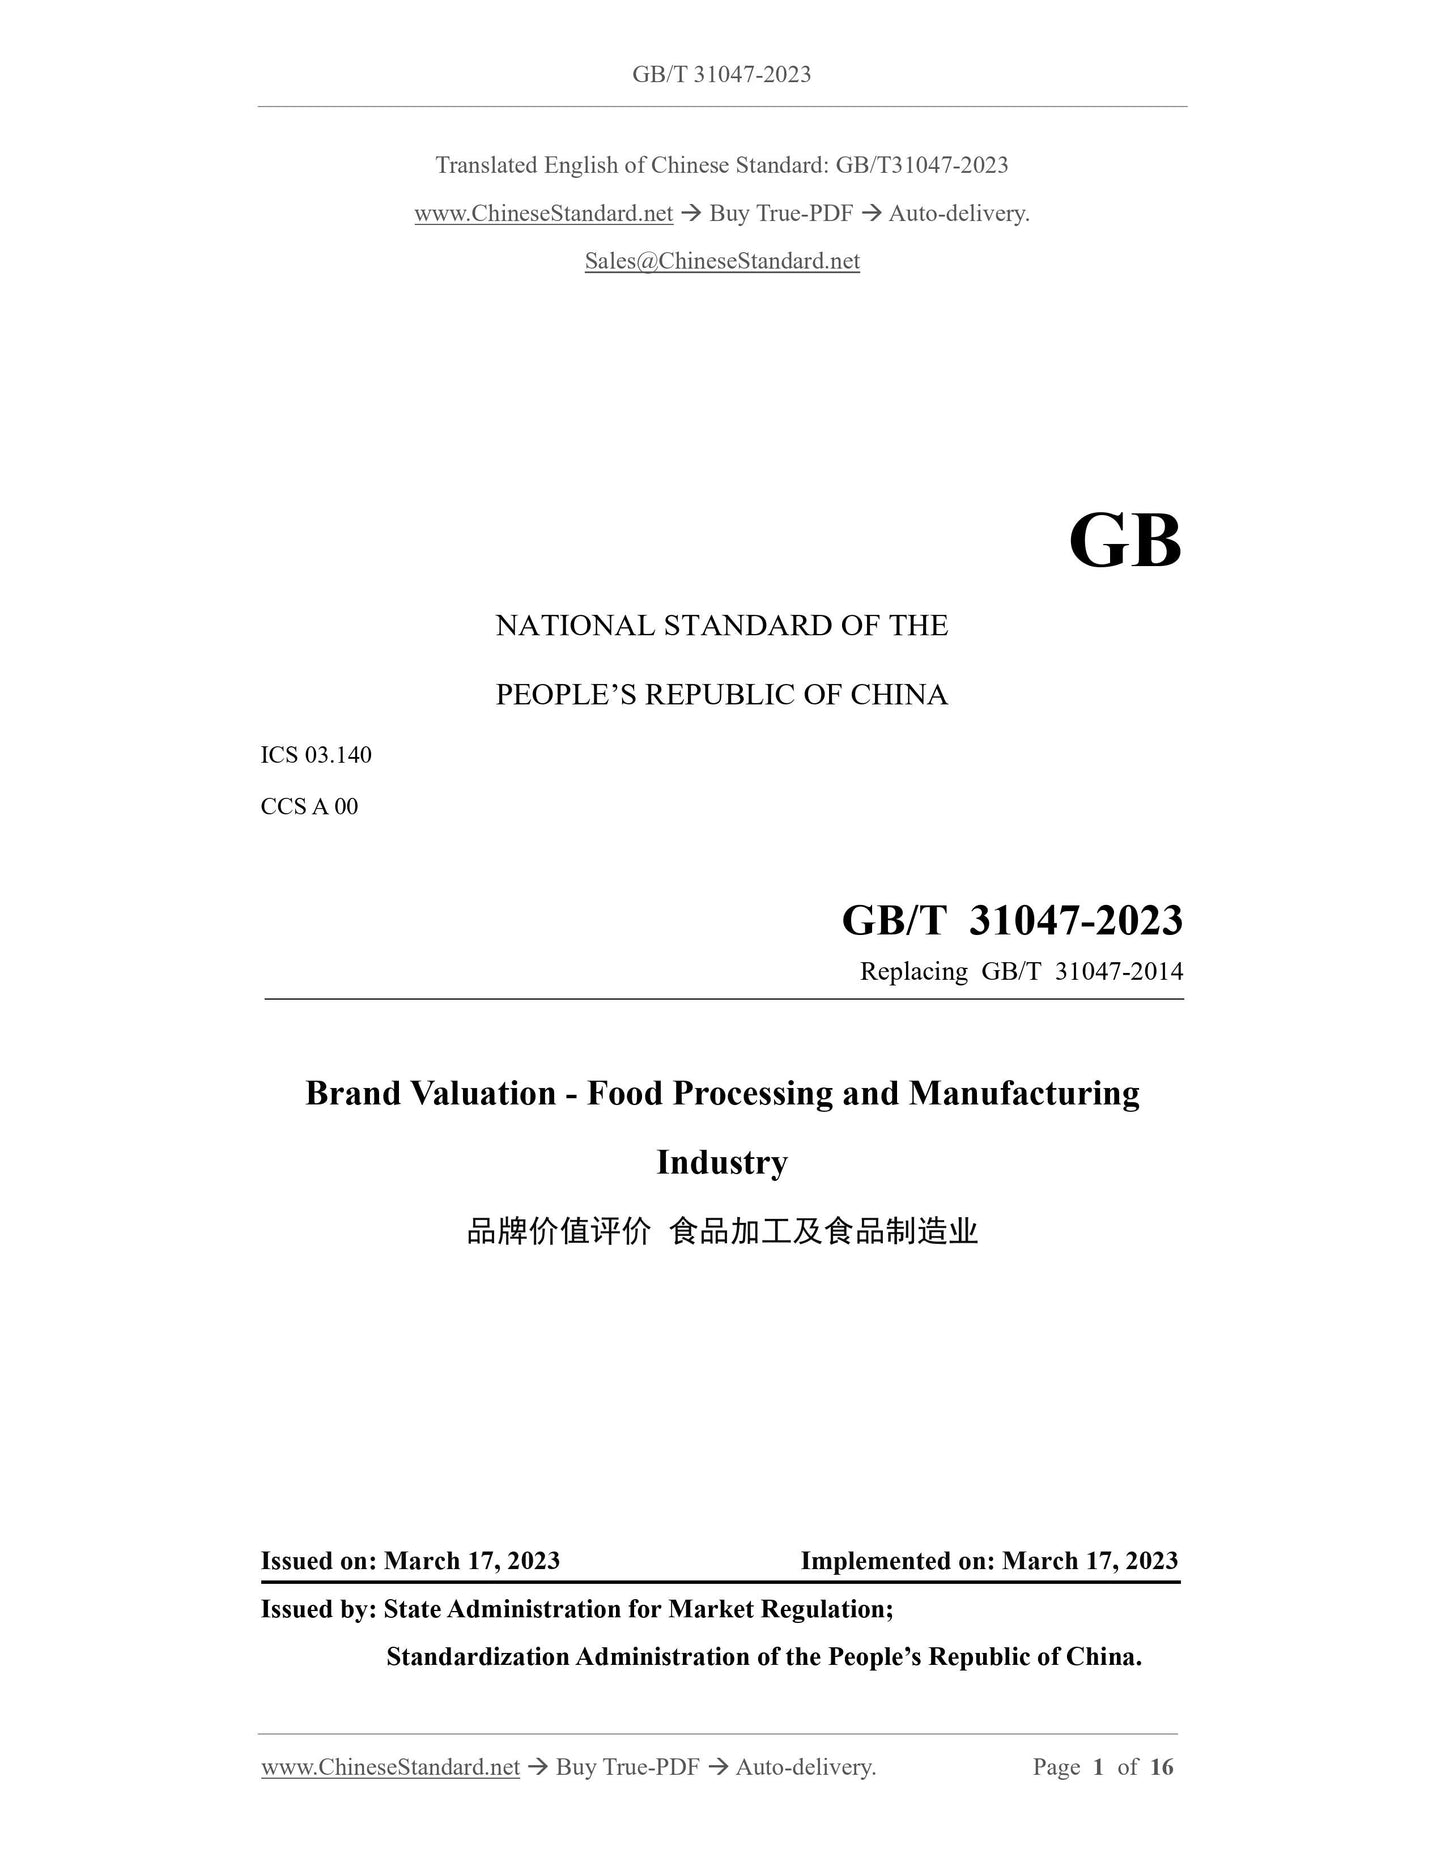 GB/T 31047-2023 Page 1